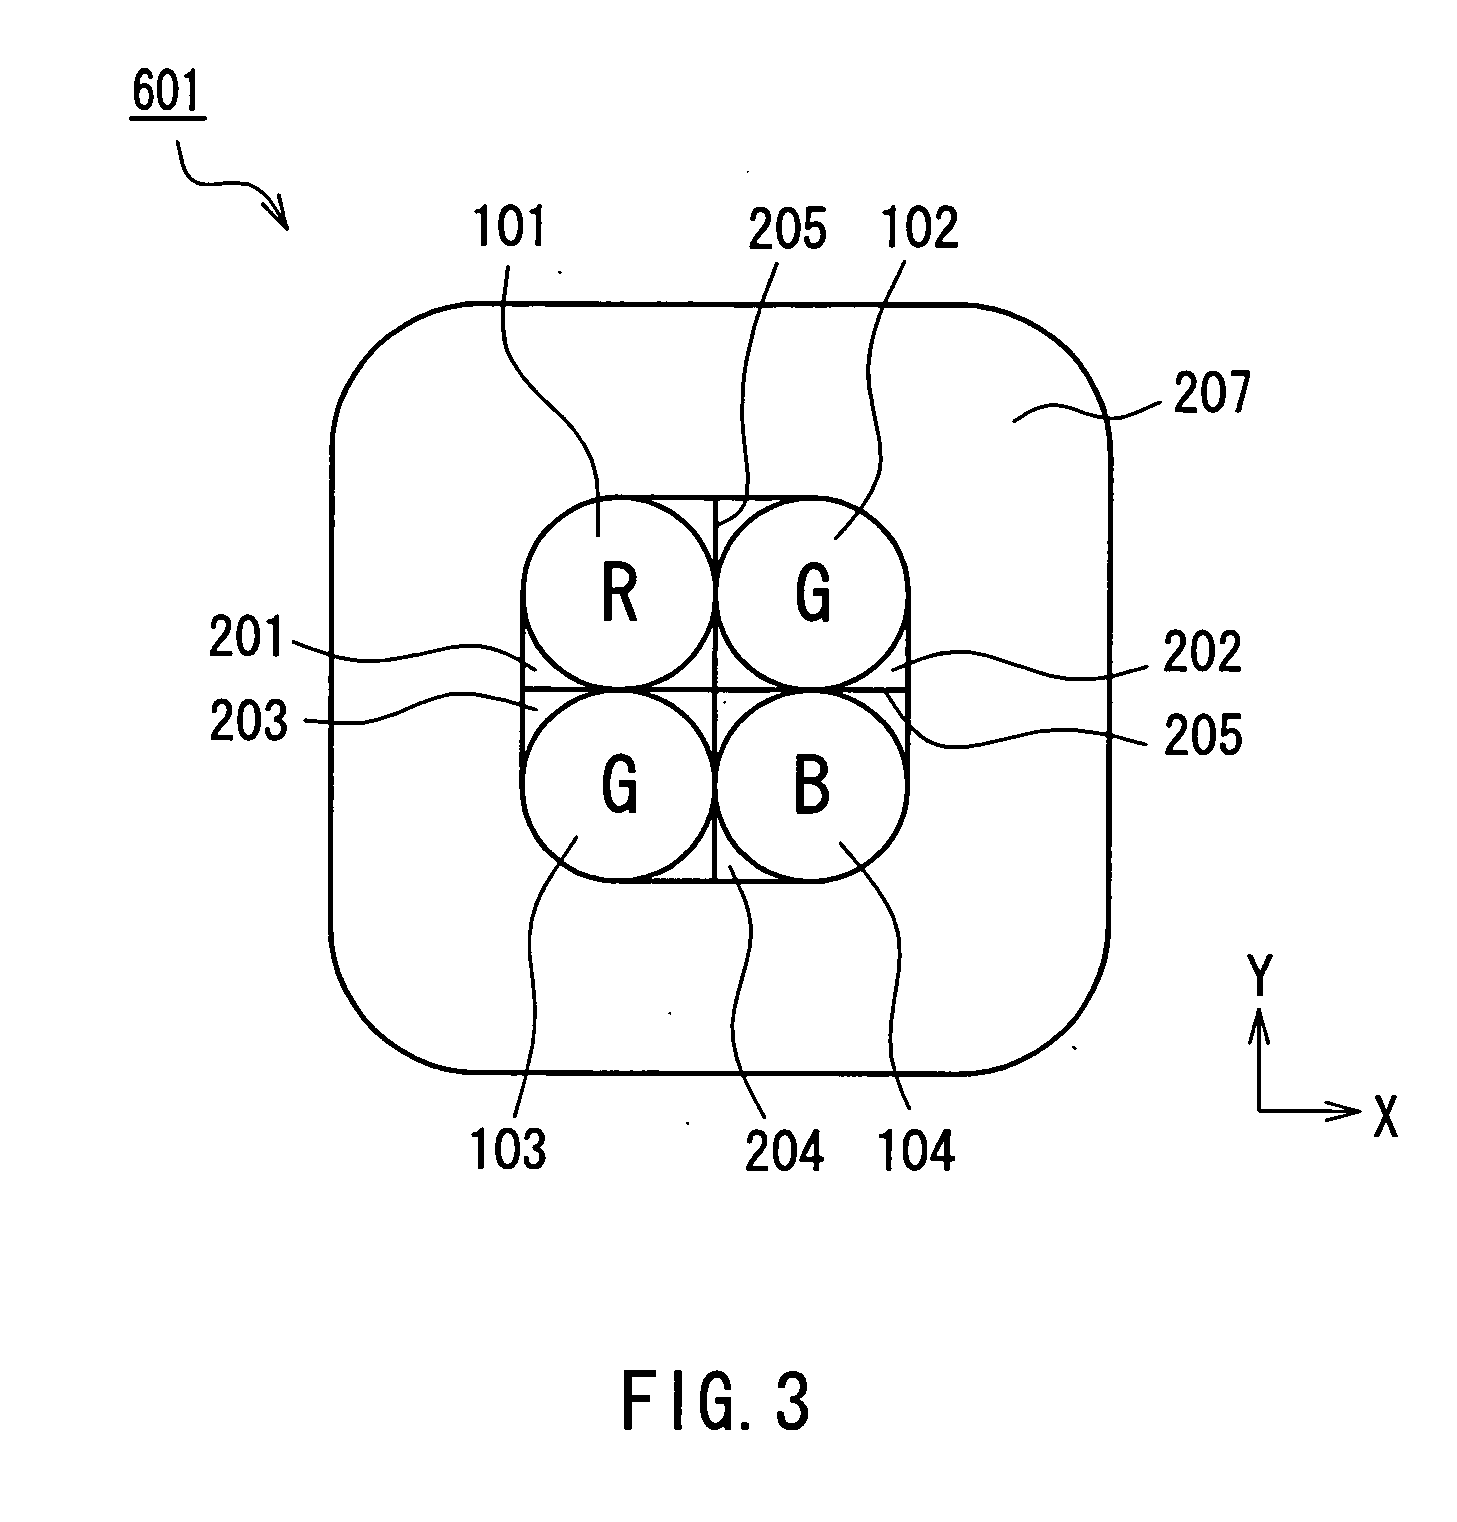 Imaging apparatus and method for producing the same, portable equipment, and imaging sensor and method for producing the same